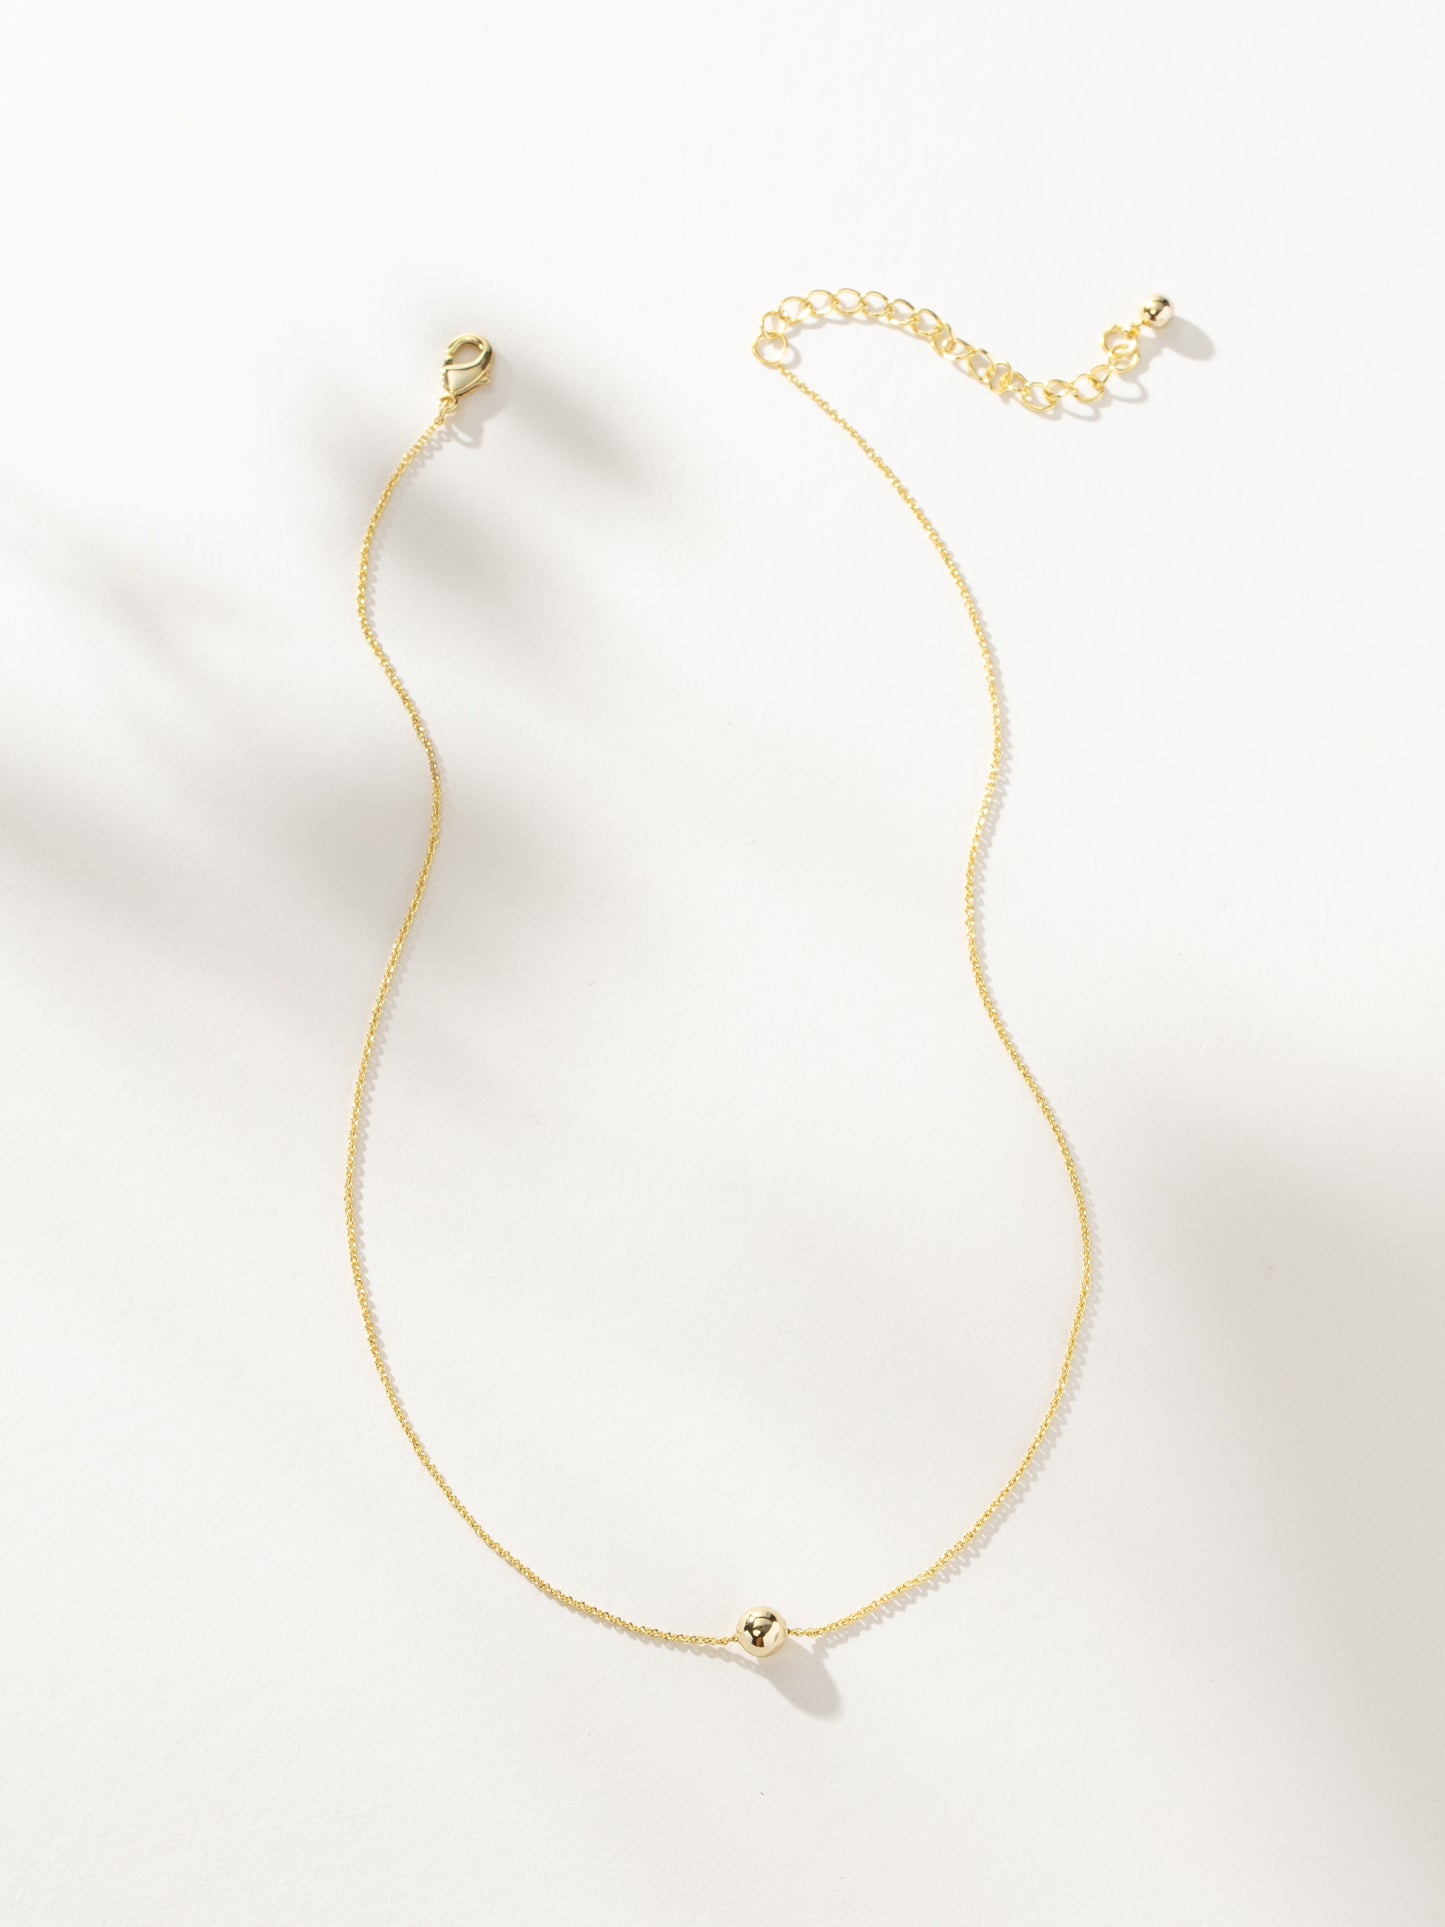 Solo Necklace | Gold | Product Image | Uncommon James